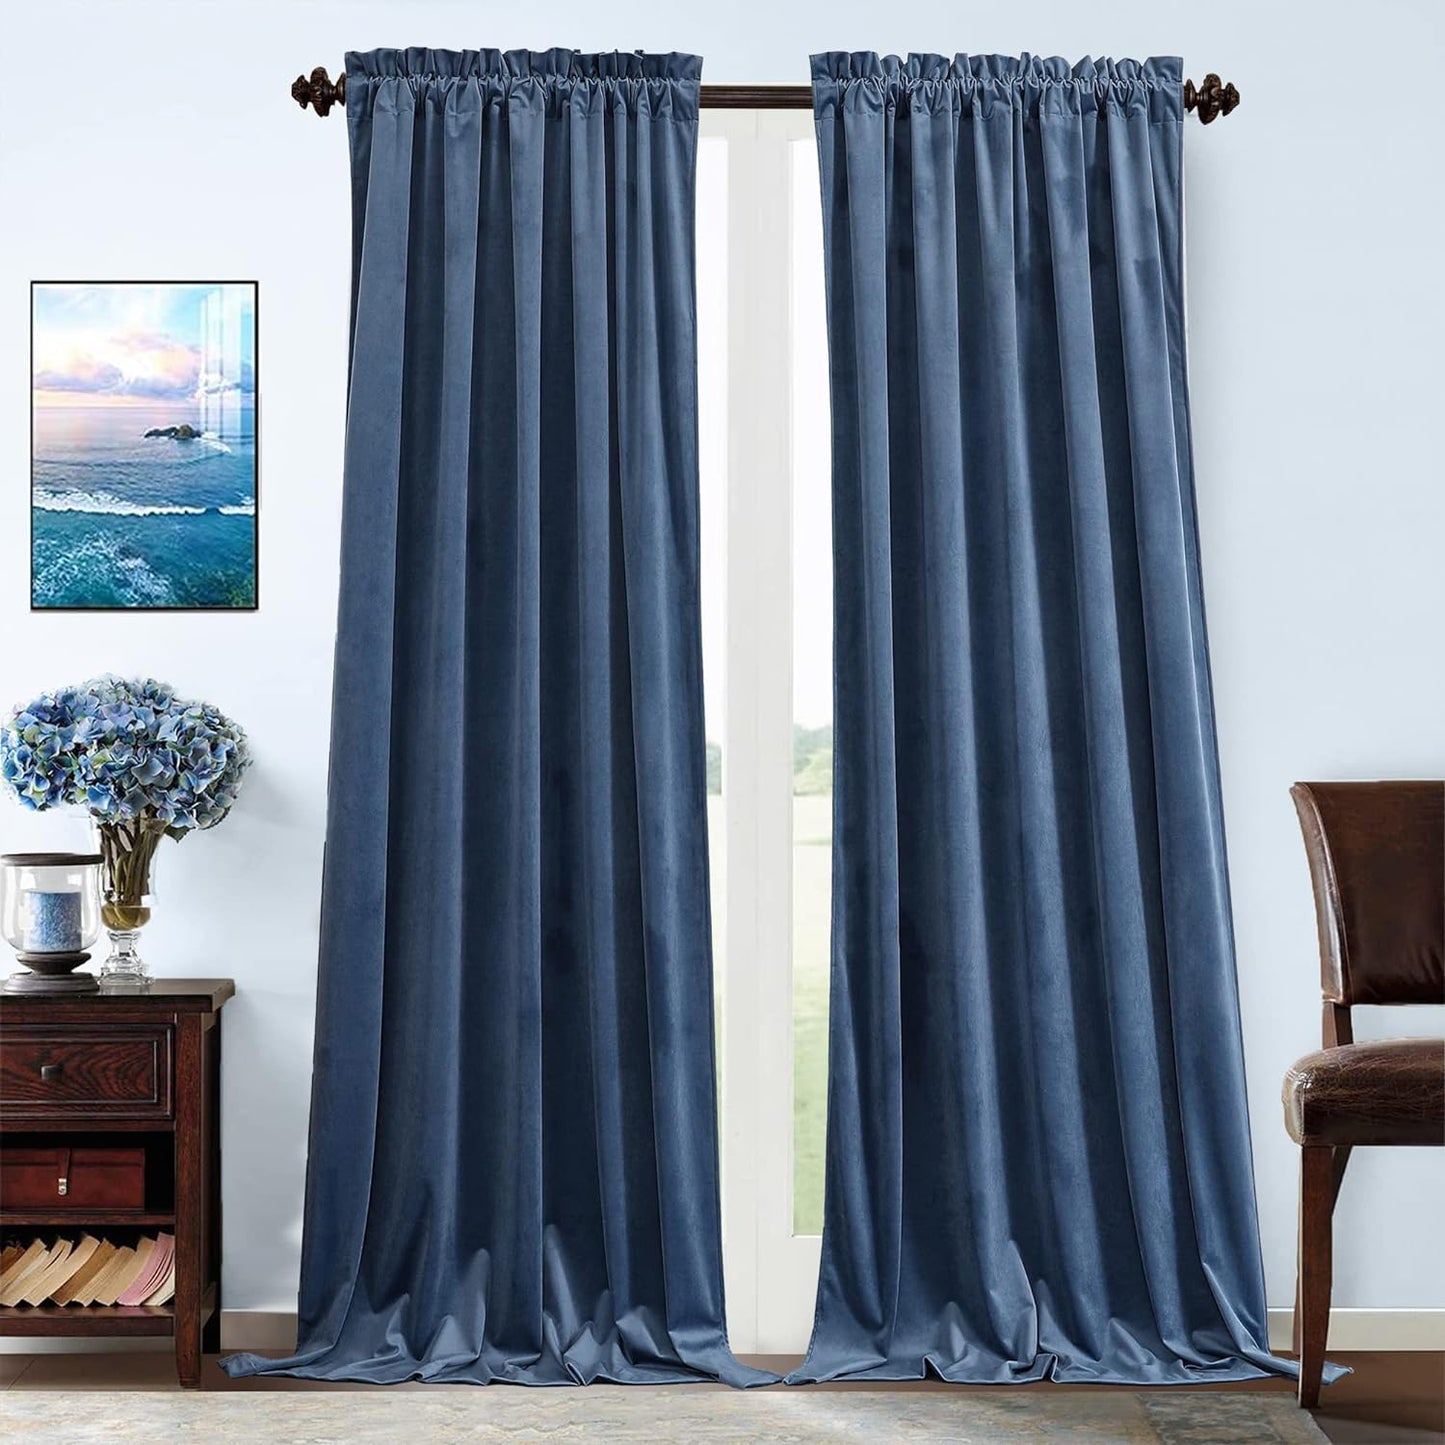 Benedeco Green Velvet Curtains for Bedroom Window, Super Soft Luxury Drapes, Room Darkening Thermal Insulated Rod Pocket Curtain for Living Room, W52 by L84 Inches, 2 Panels  Benedeco Ocean Blue W52 * L84 | 2 Panels 